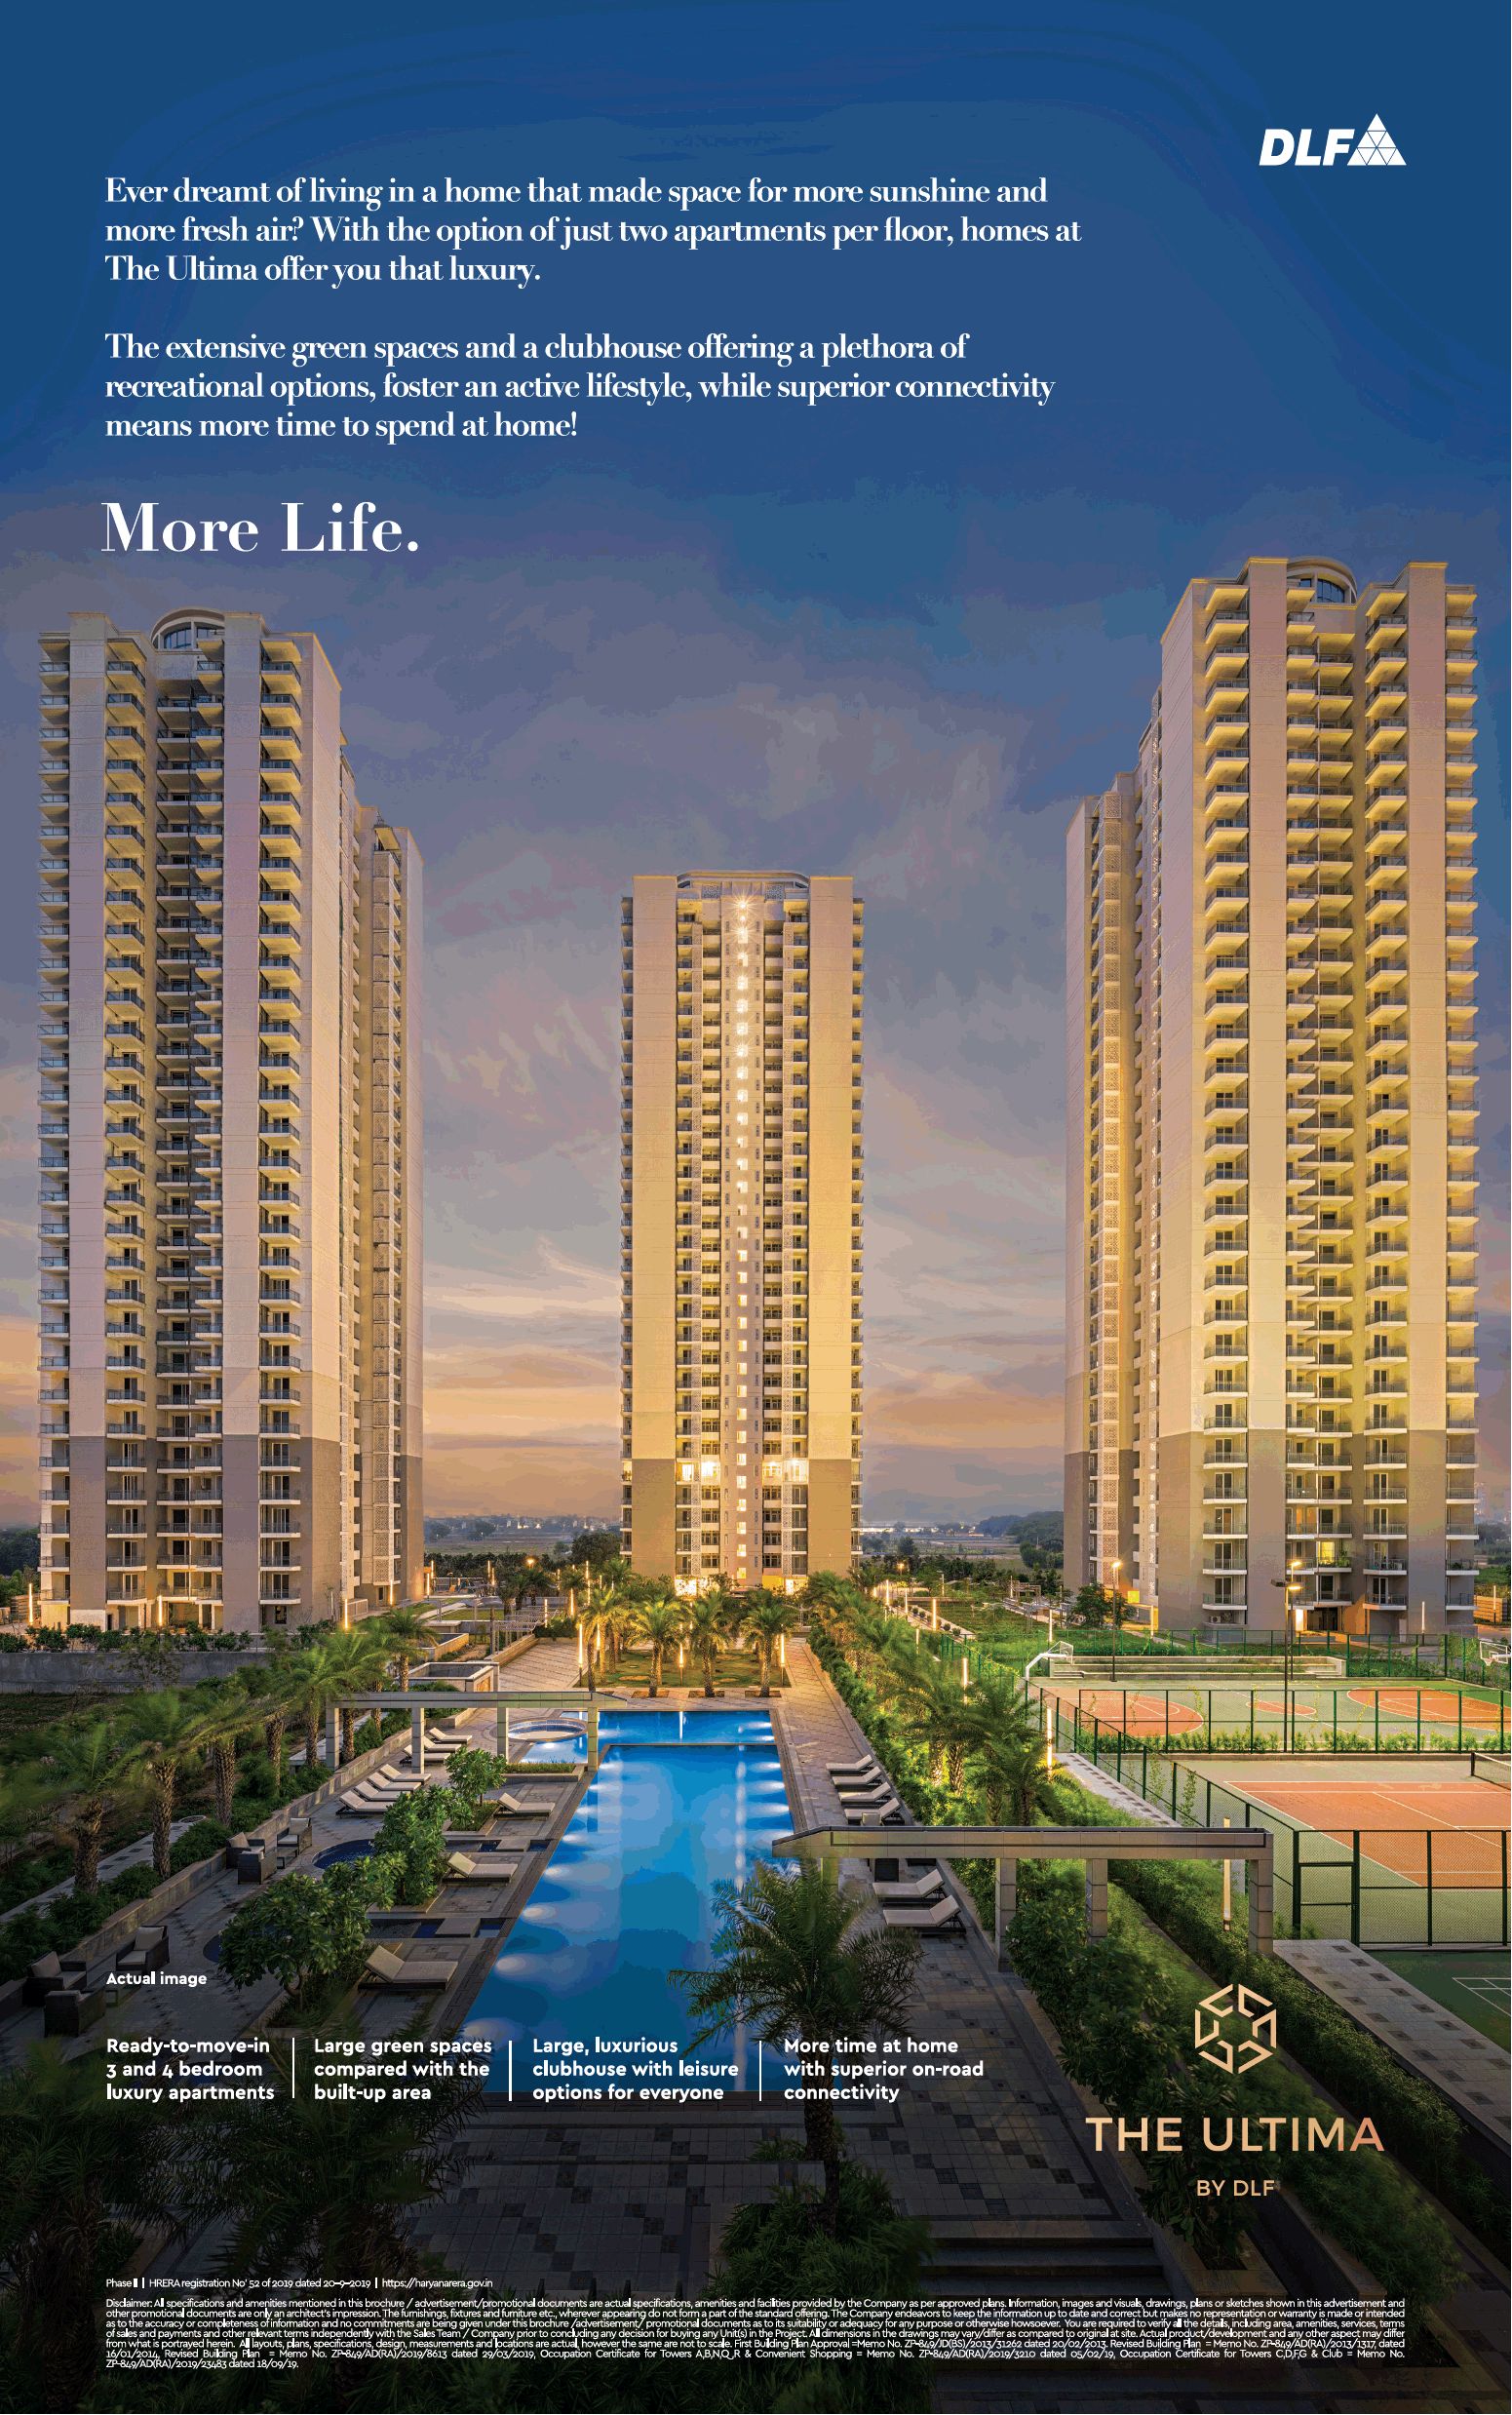 Ready-to-move-in 3 and 4 bedroom luxury apartments at DLF Ultima in Gurgaon